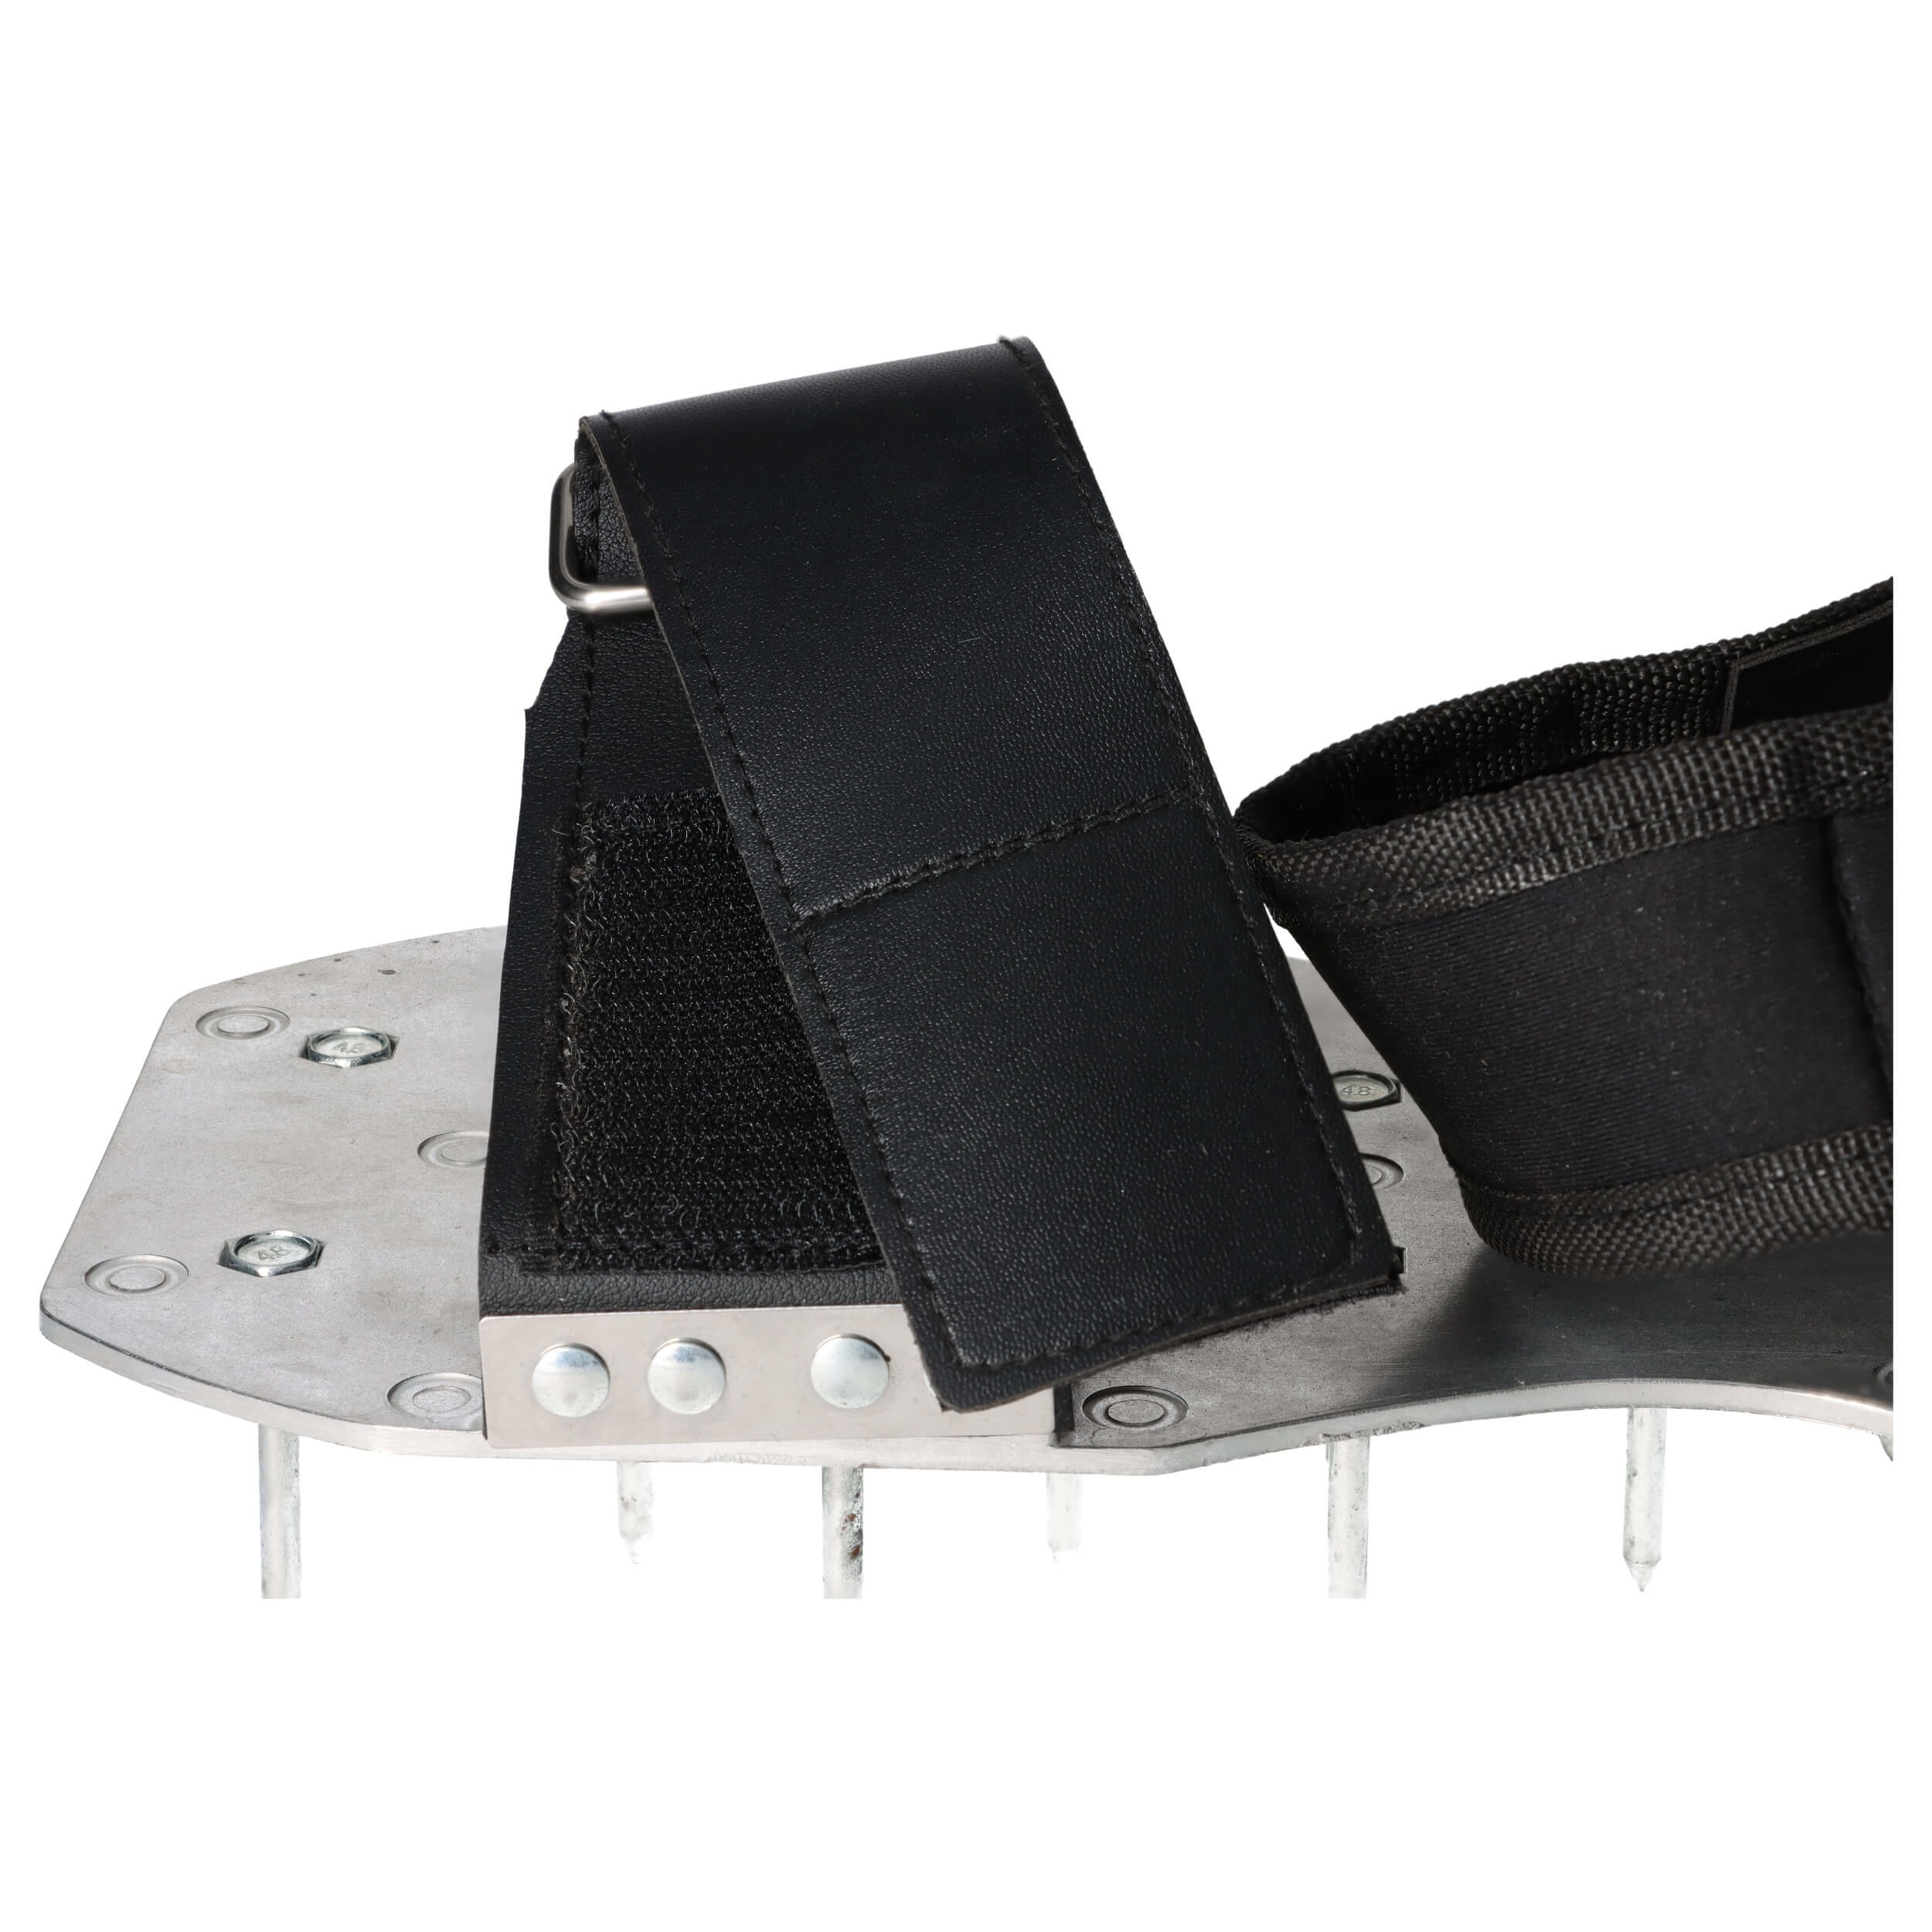 Lawn aerator shoes Nail shoes with Velcro sole made of steel - For lawn aeration - 50mm and 35mm spike nails aerator lawn aerator